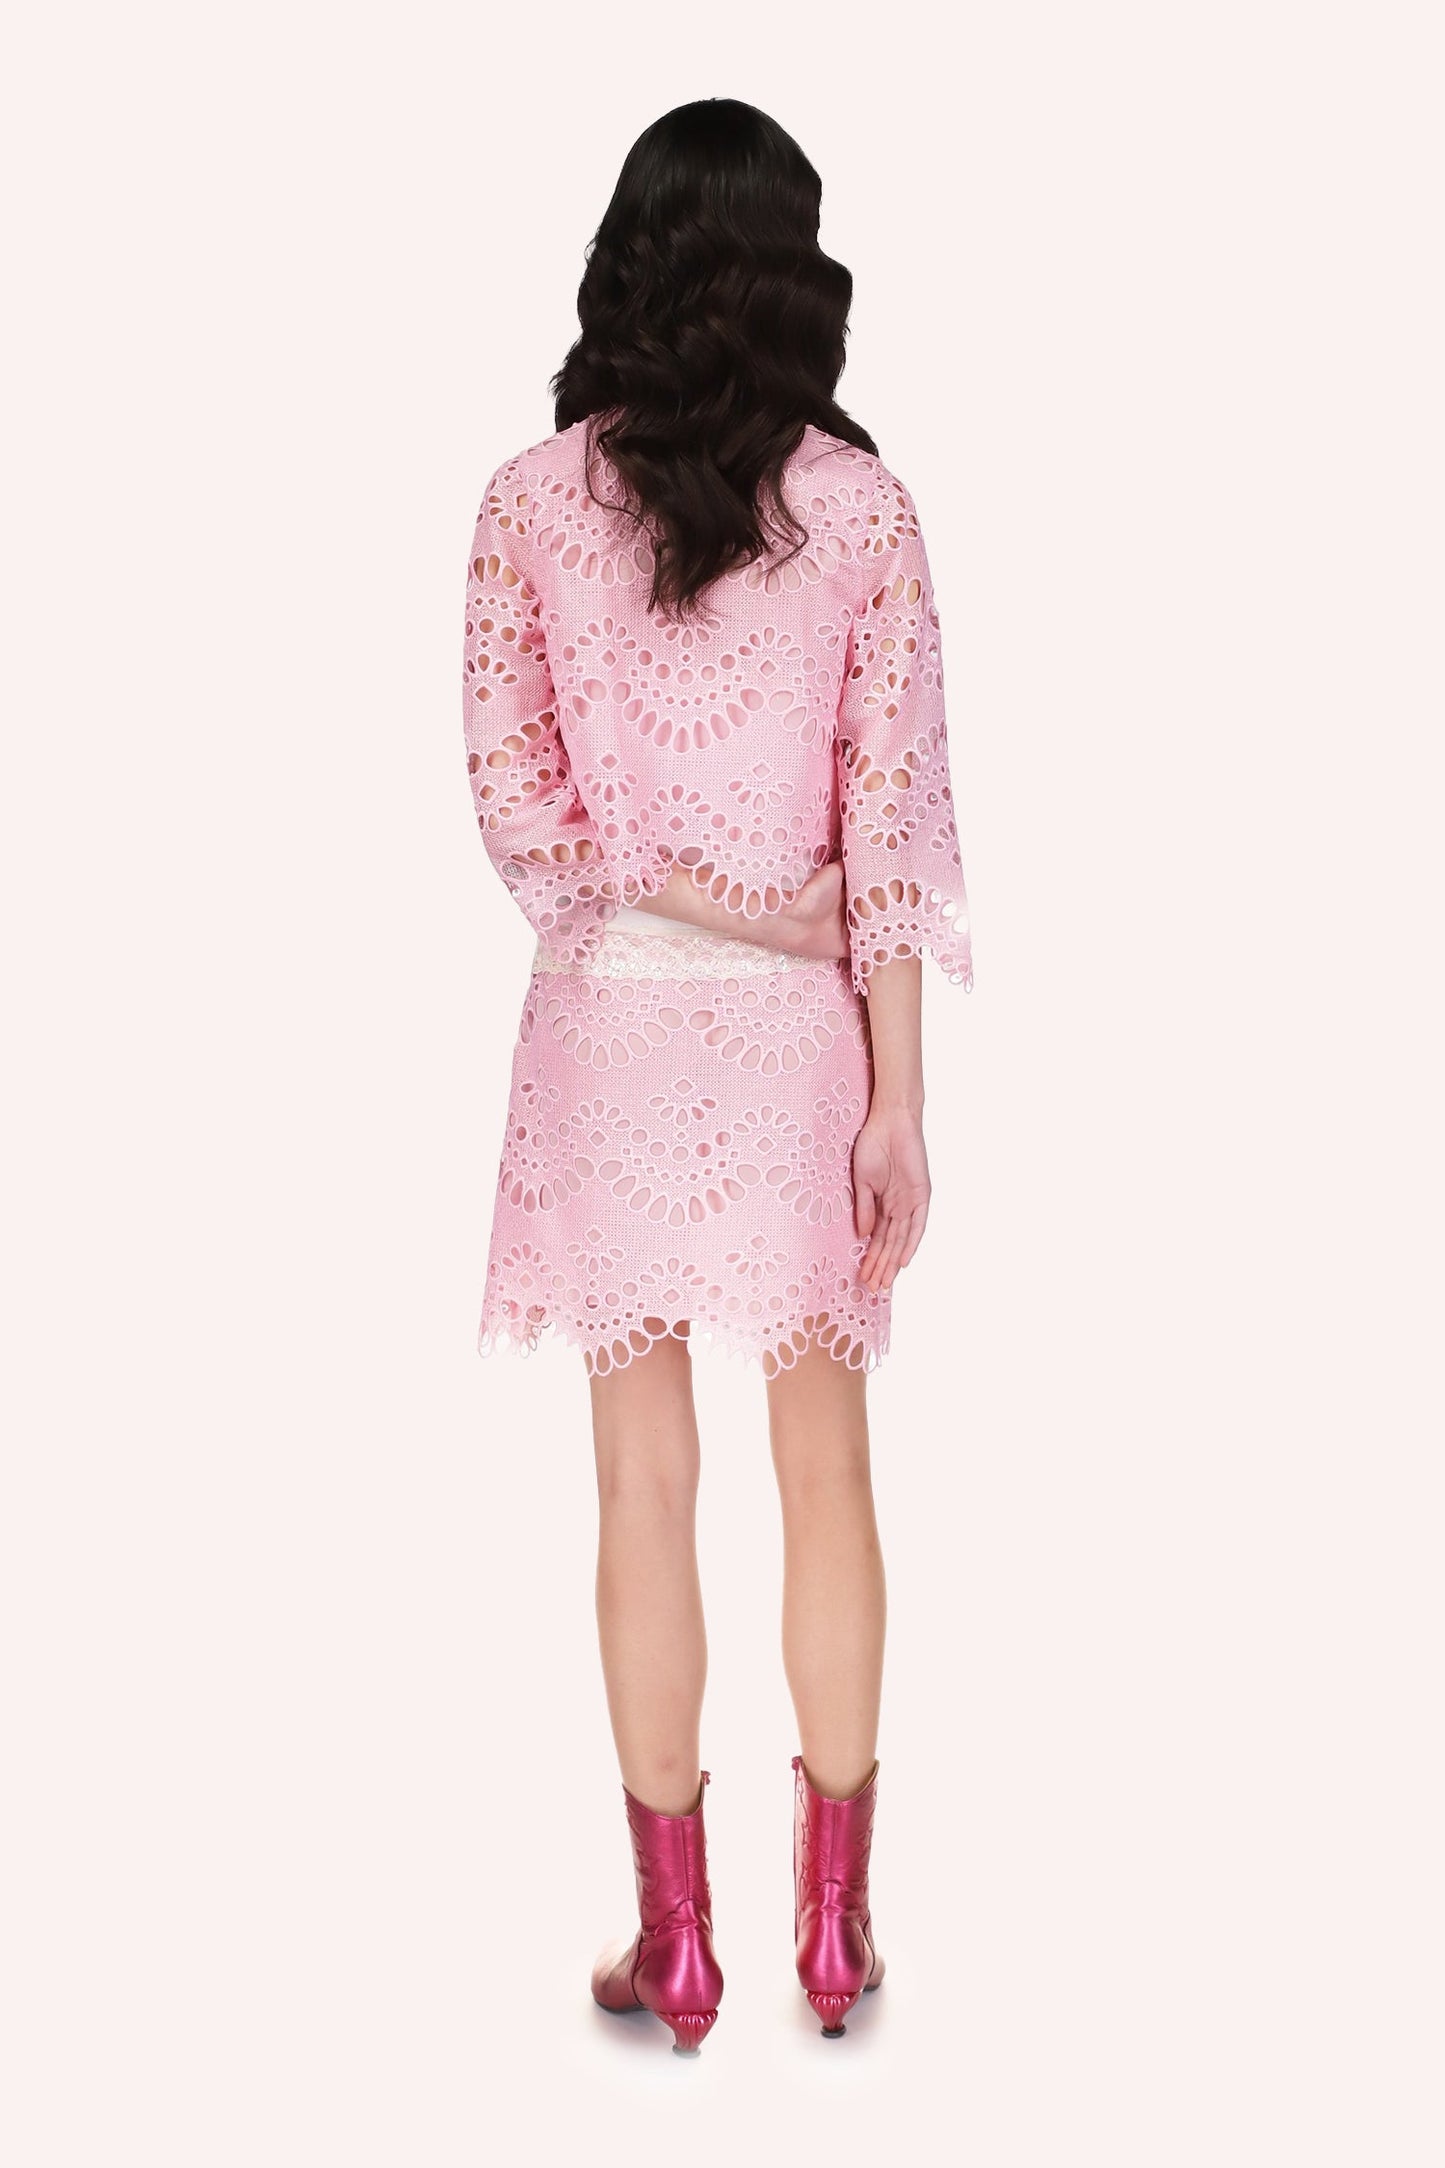 Eyelet Skirt, pink with from small to large oval eyelets, wavy bottom hem.